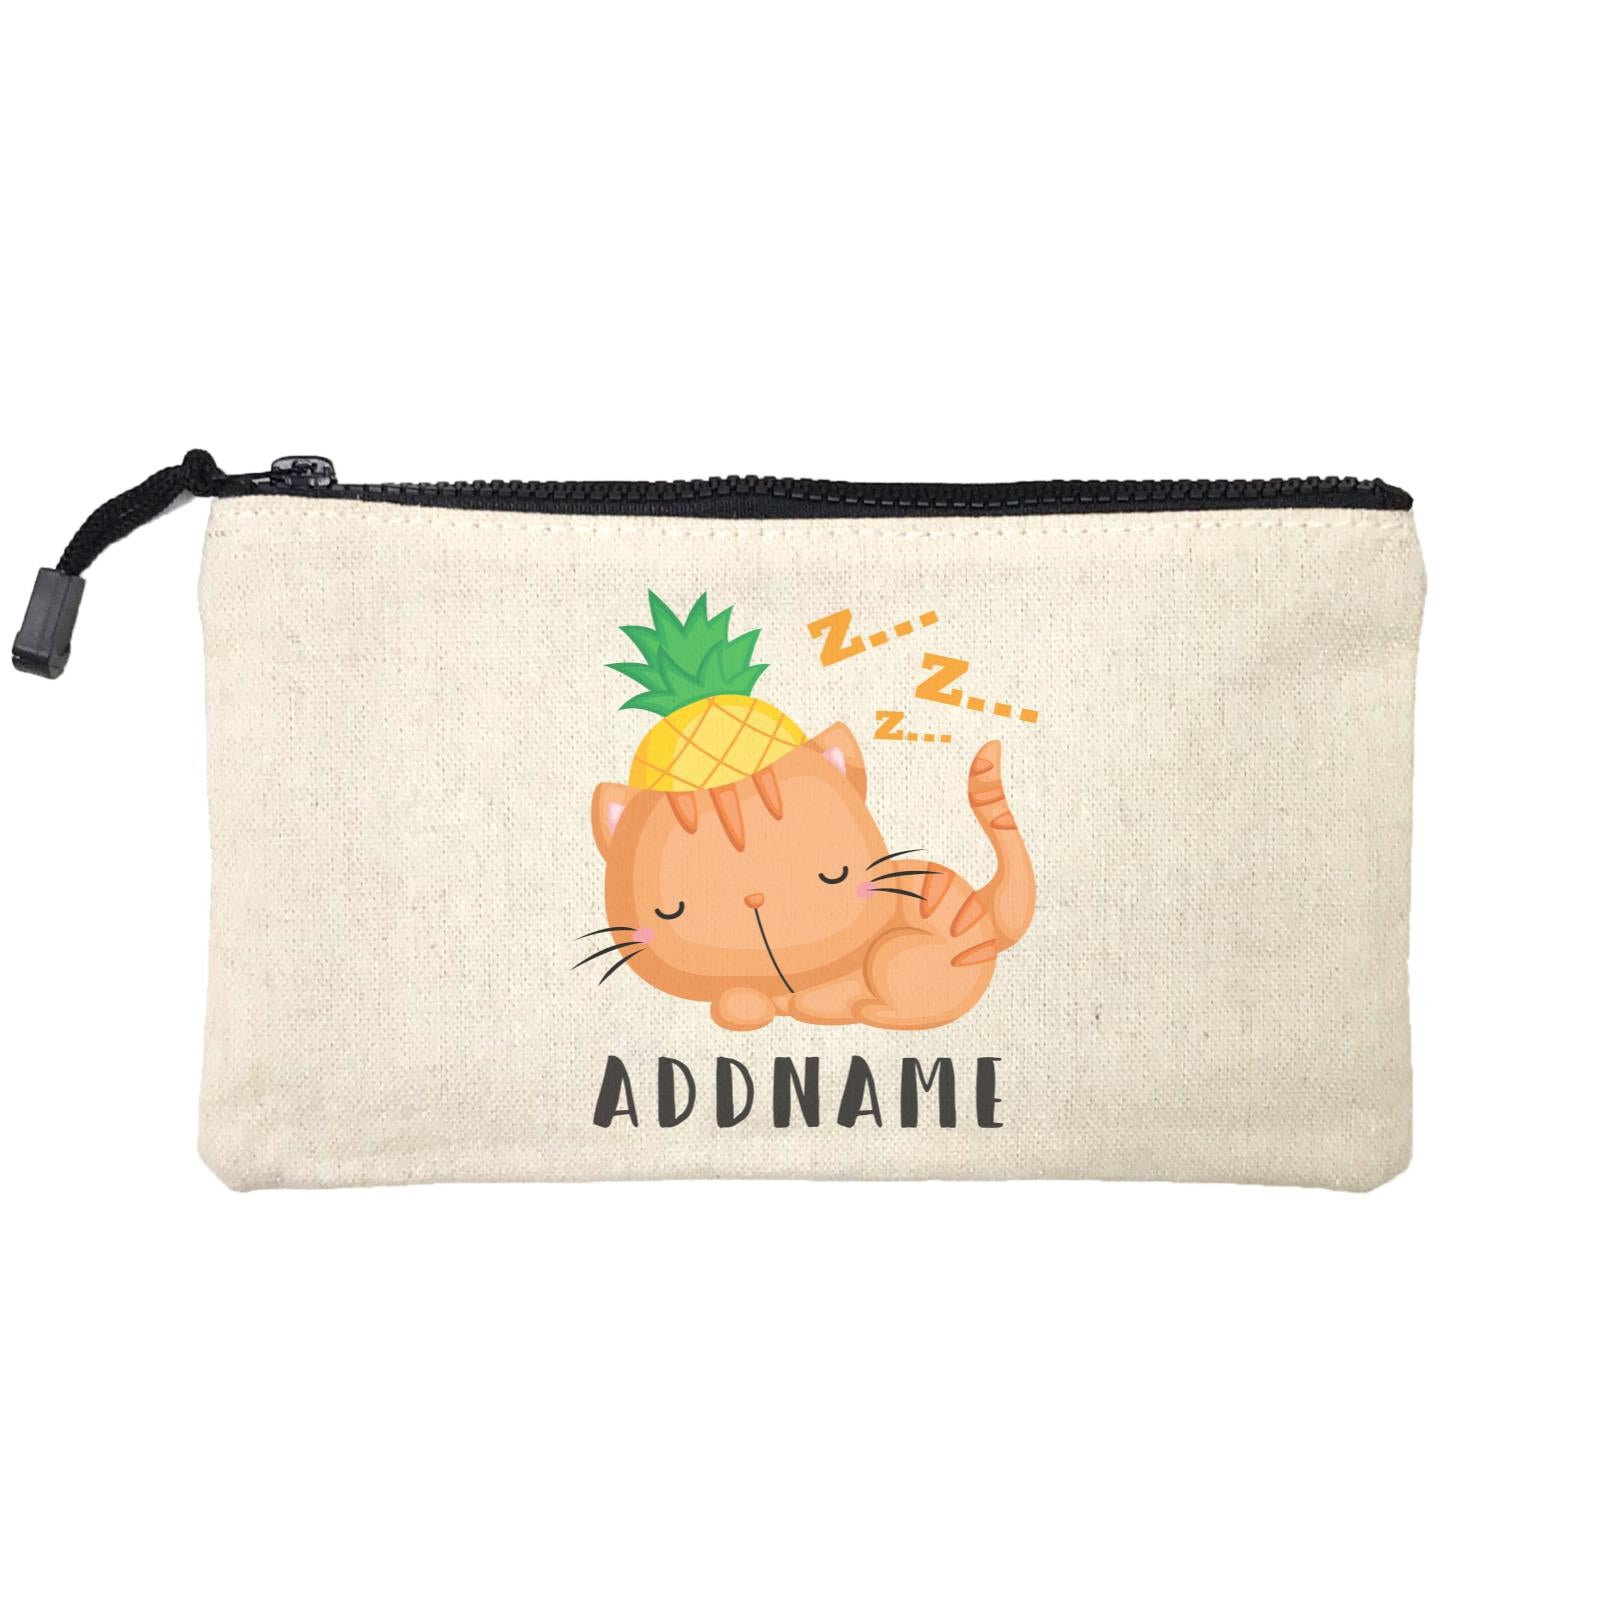 Birthday Hawaii Sleeping Cat Wearing Pineapple Hat Addname Mini Accessories Stationery Pouch